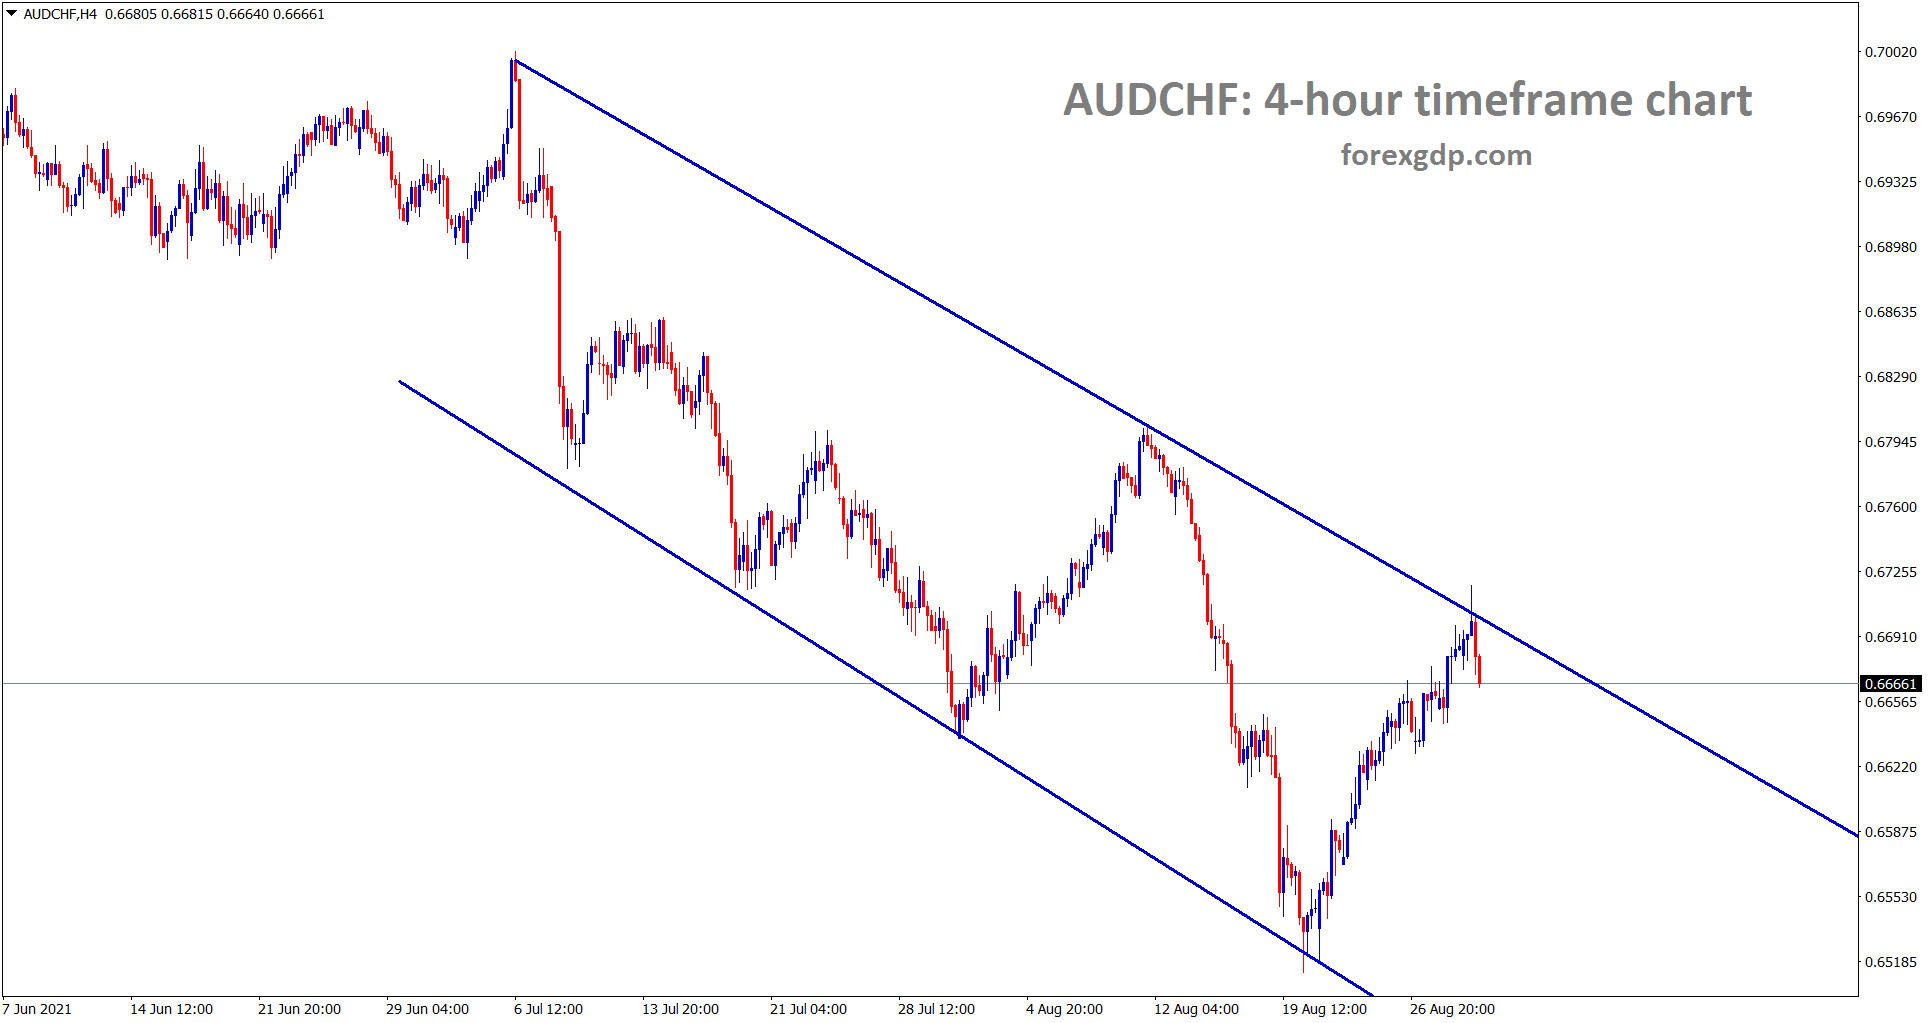 AUDCHF is making some correction from the lower high of the descending channel wait for the confirmation of breakout or reversal